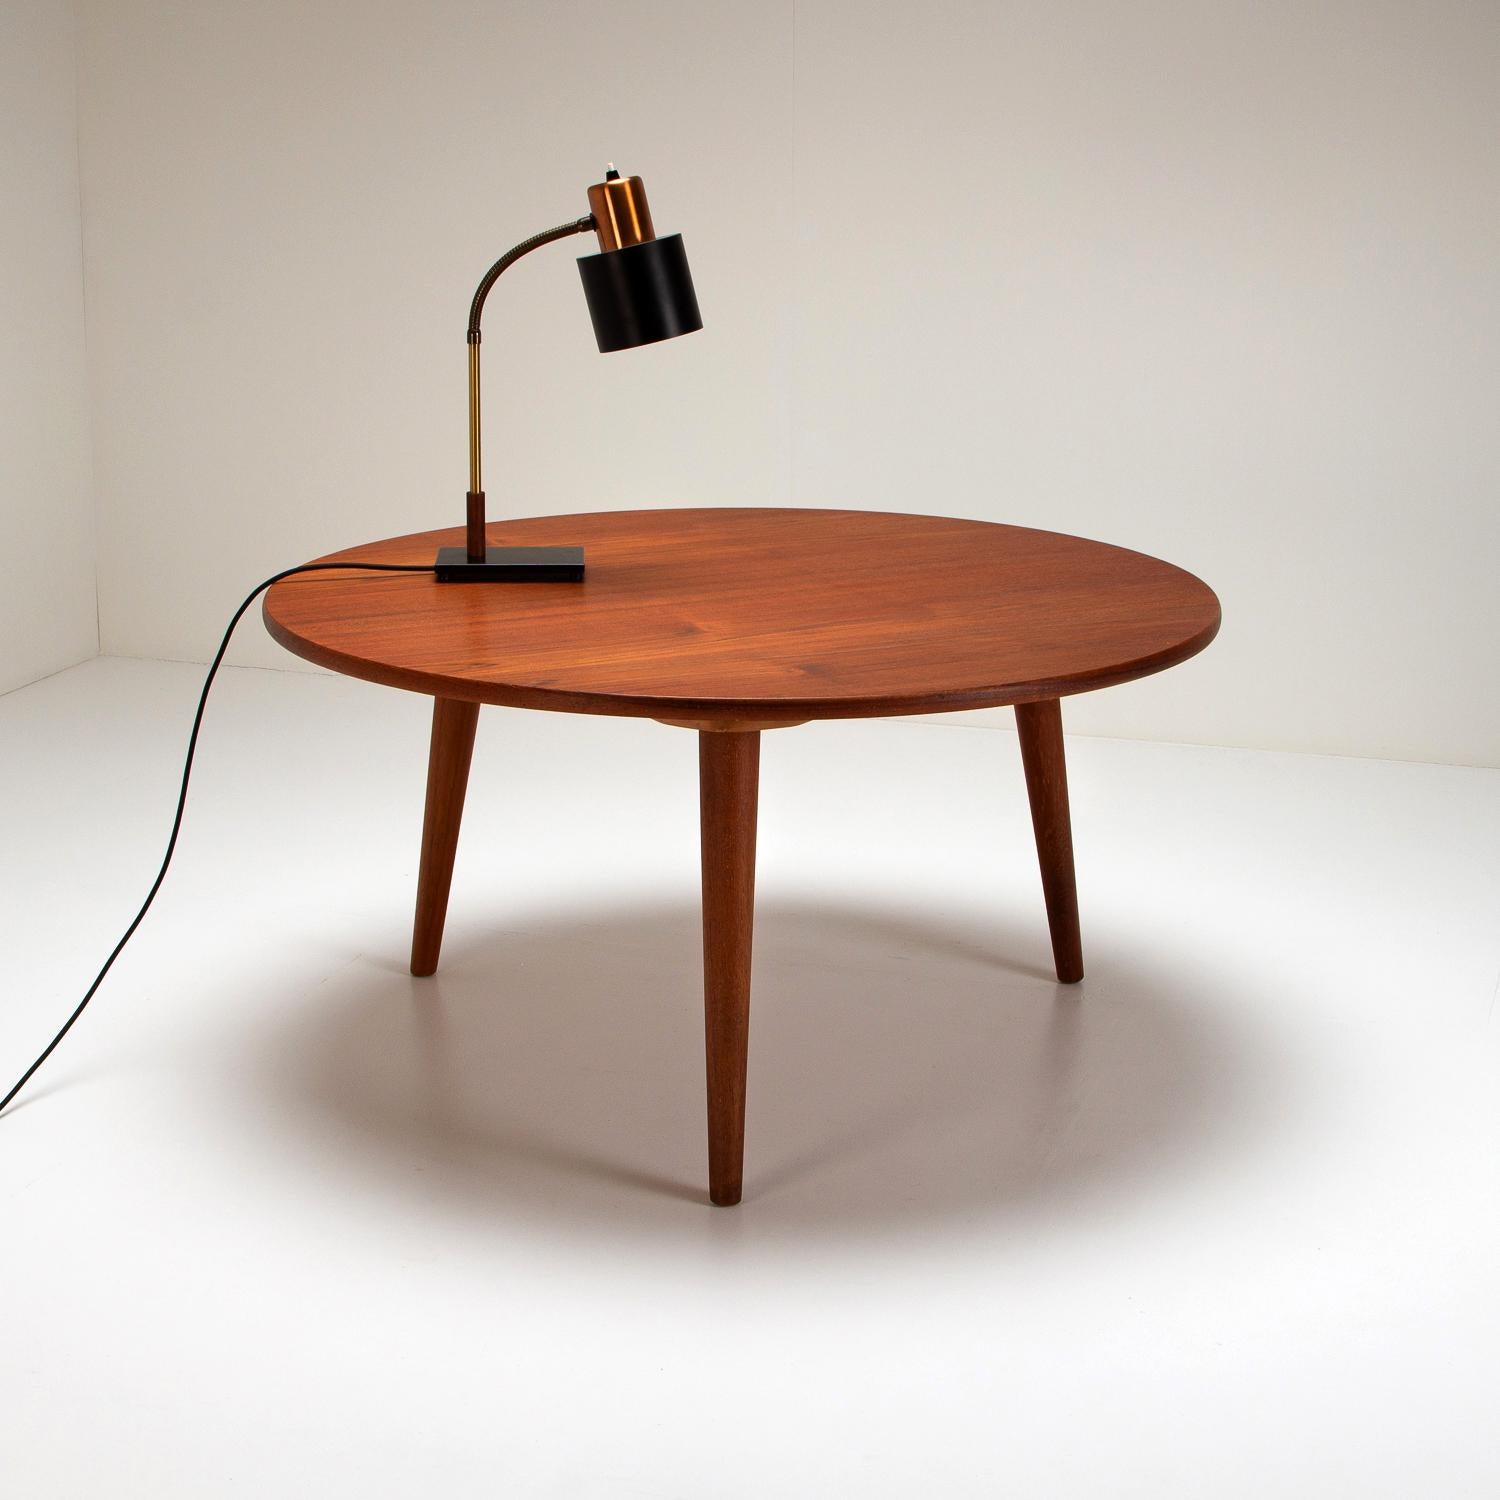 A Model AT 8 three-leg, circular coffee table in teak designed by Hans Wegner and made by master cabinetmaker Andreas Tuck. Denmark, 1950s.

 